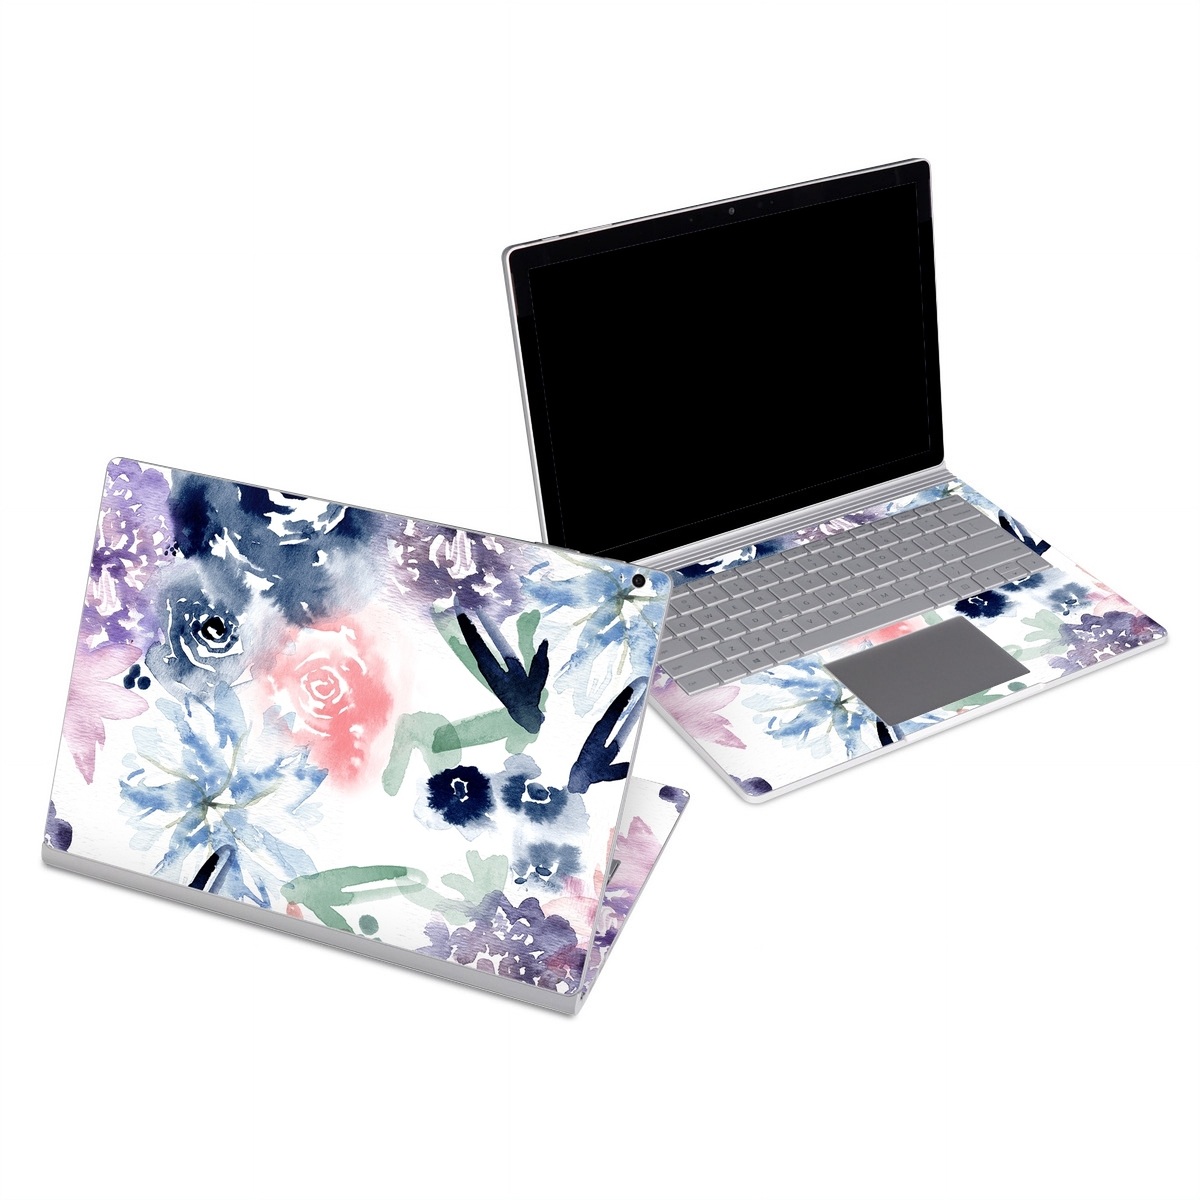 Microsoft Surface Book Series Skin design of Pattern, Graphic design, Design, Floral design, Plant, Flower, Illustration, with white, blue, purple, green, pink colors